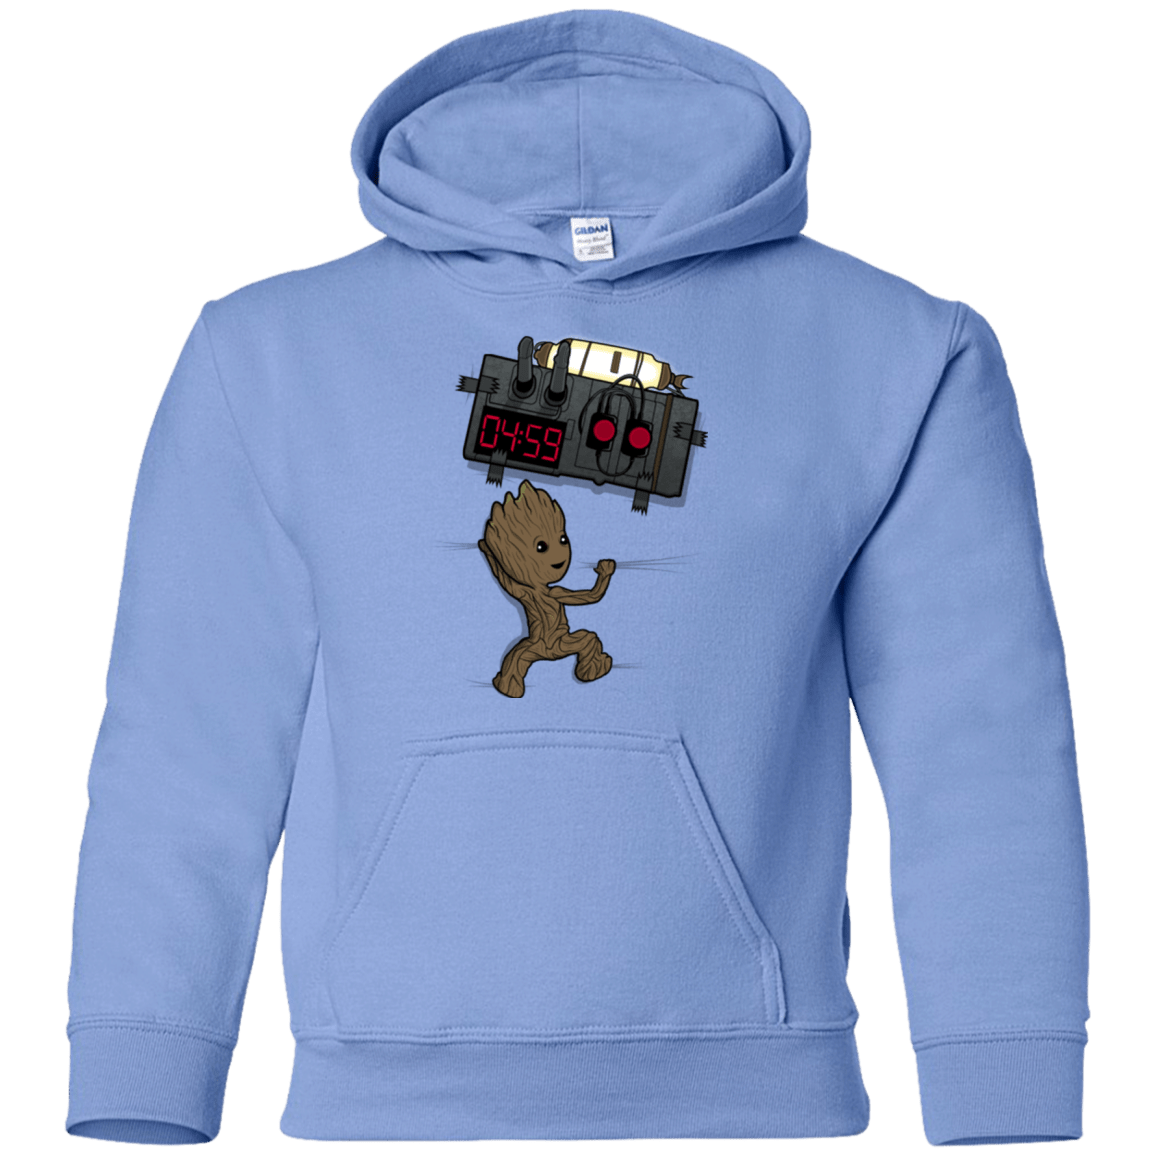 Sweatshirts Carolina Blue / YS Bomb In Your Chest! Youth Hoodie